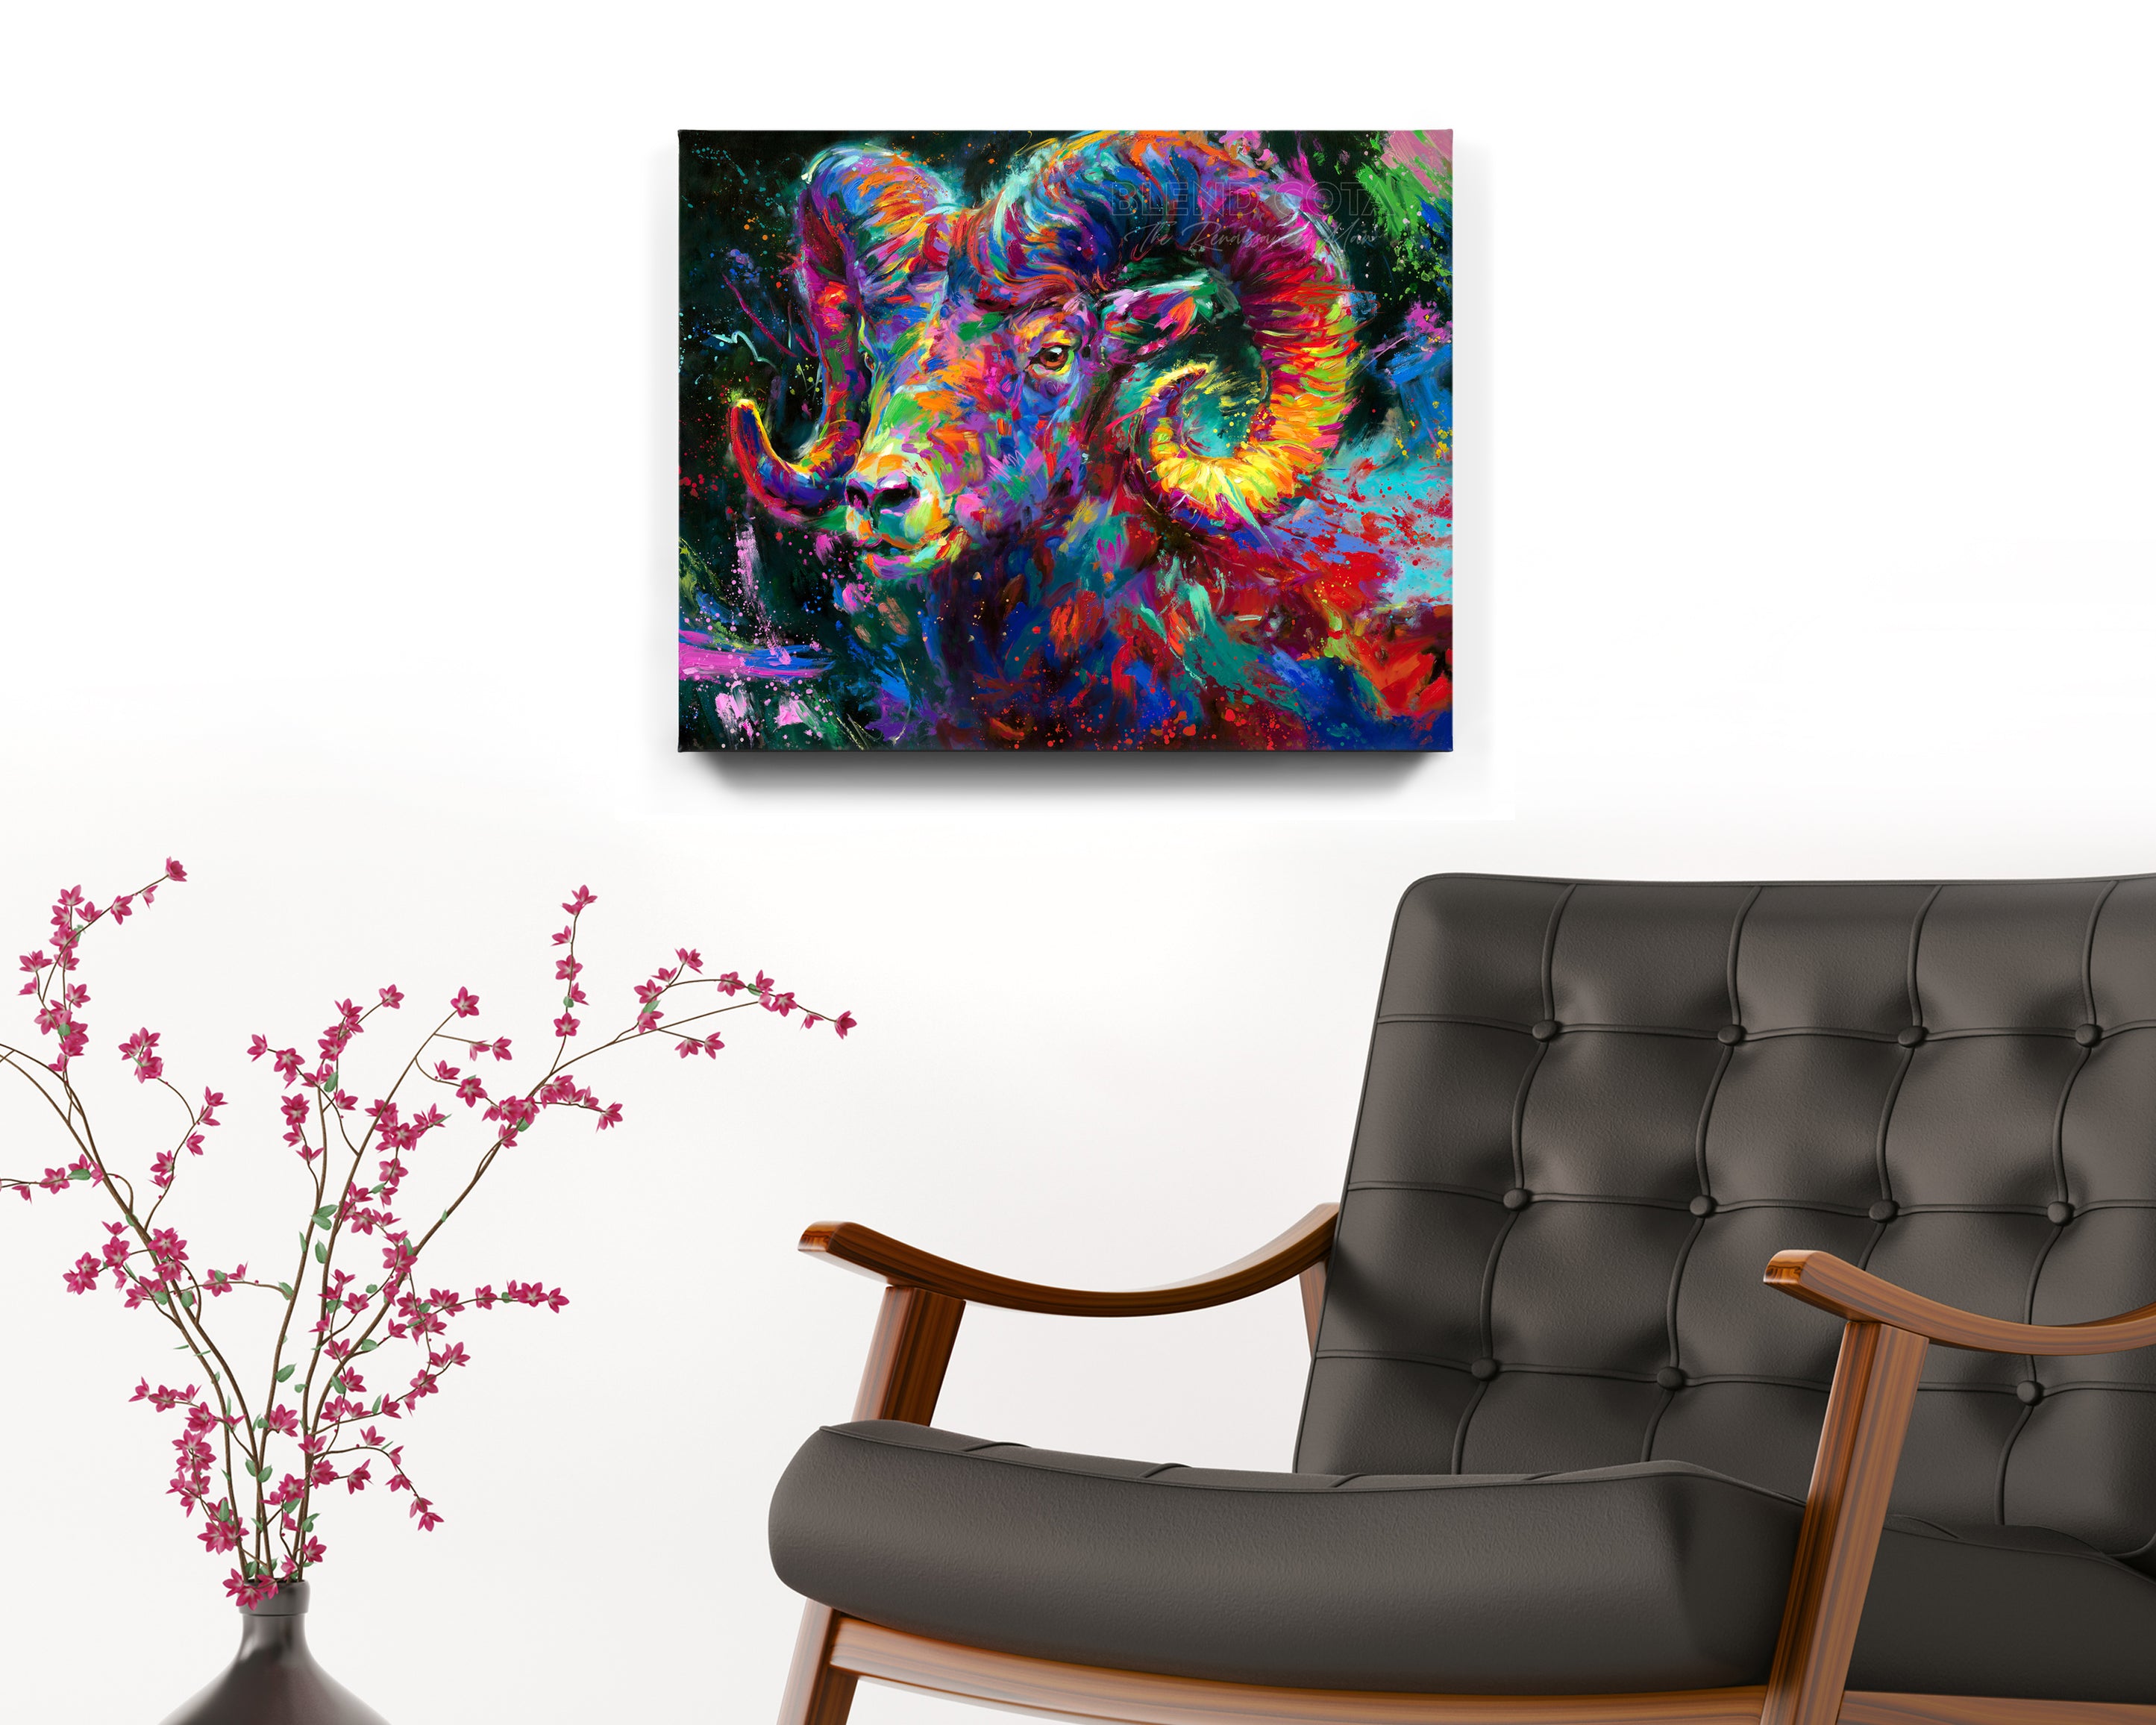 The Ram Spirit painted by Blend Cota Art Print on canvas from Blend Cota Studios